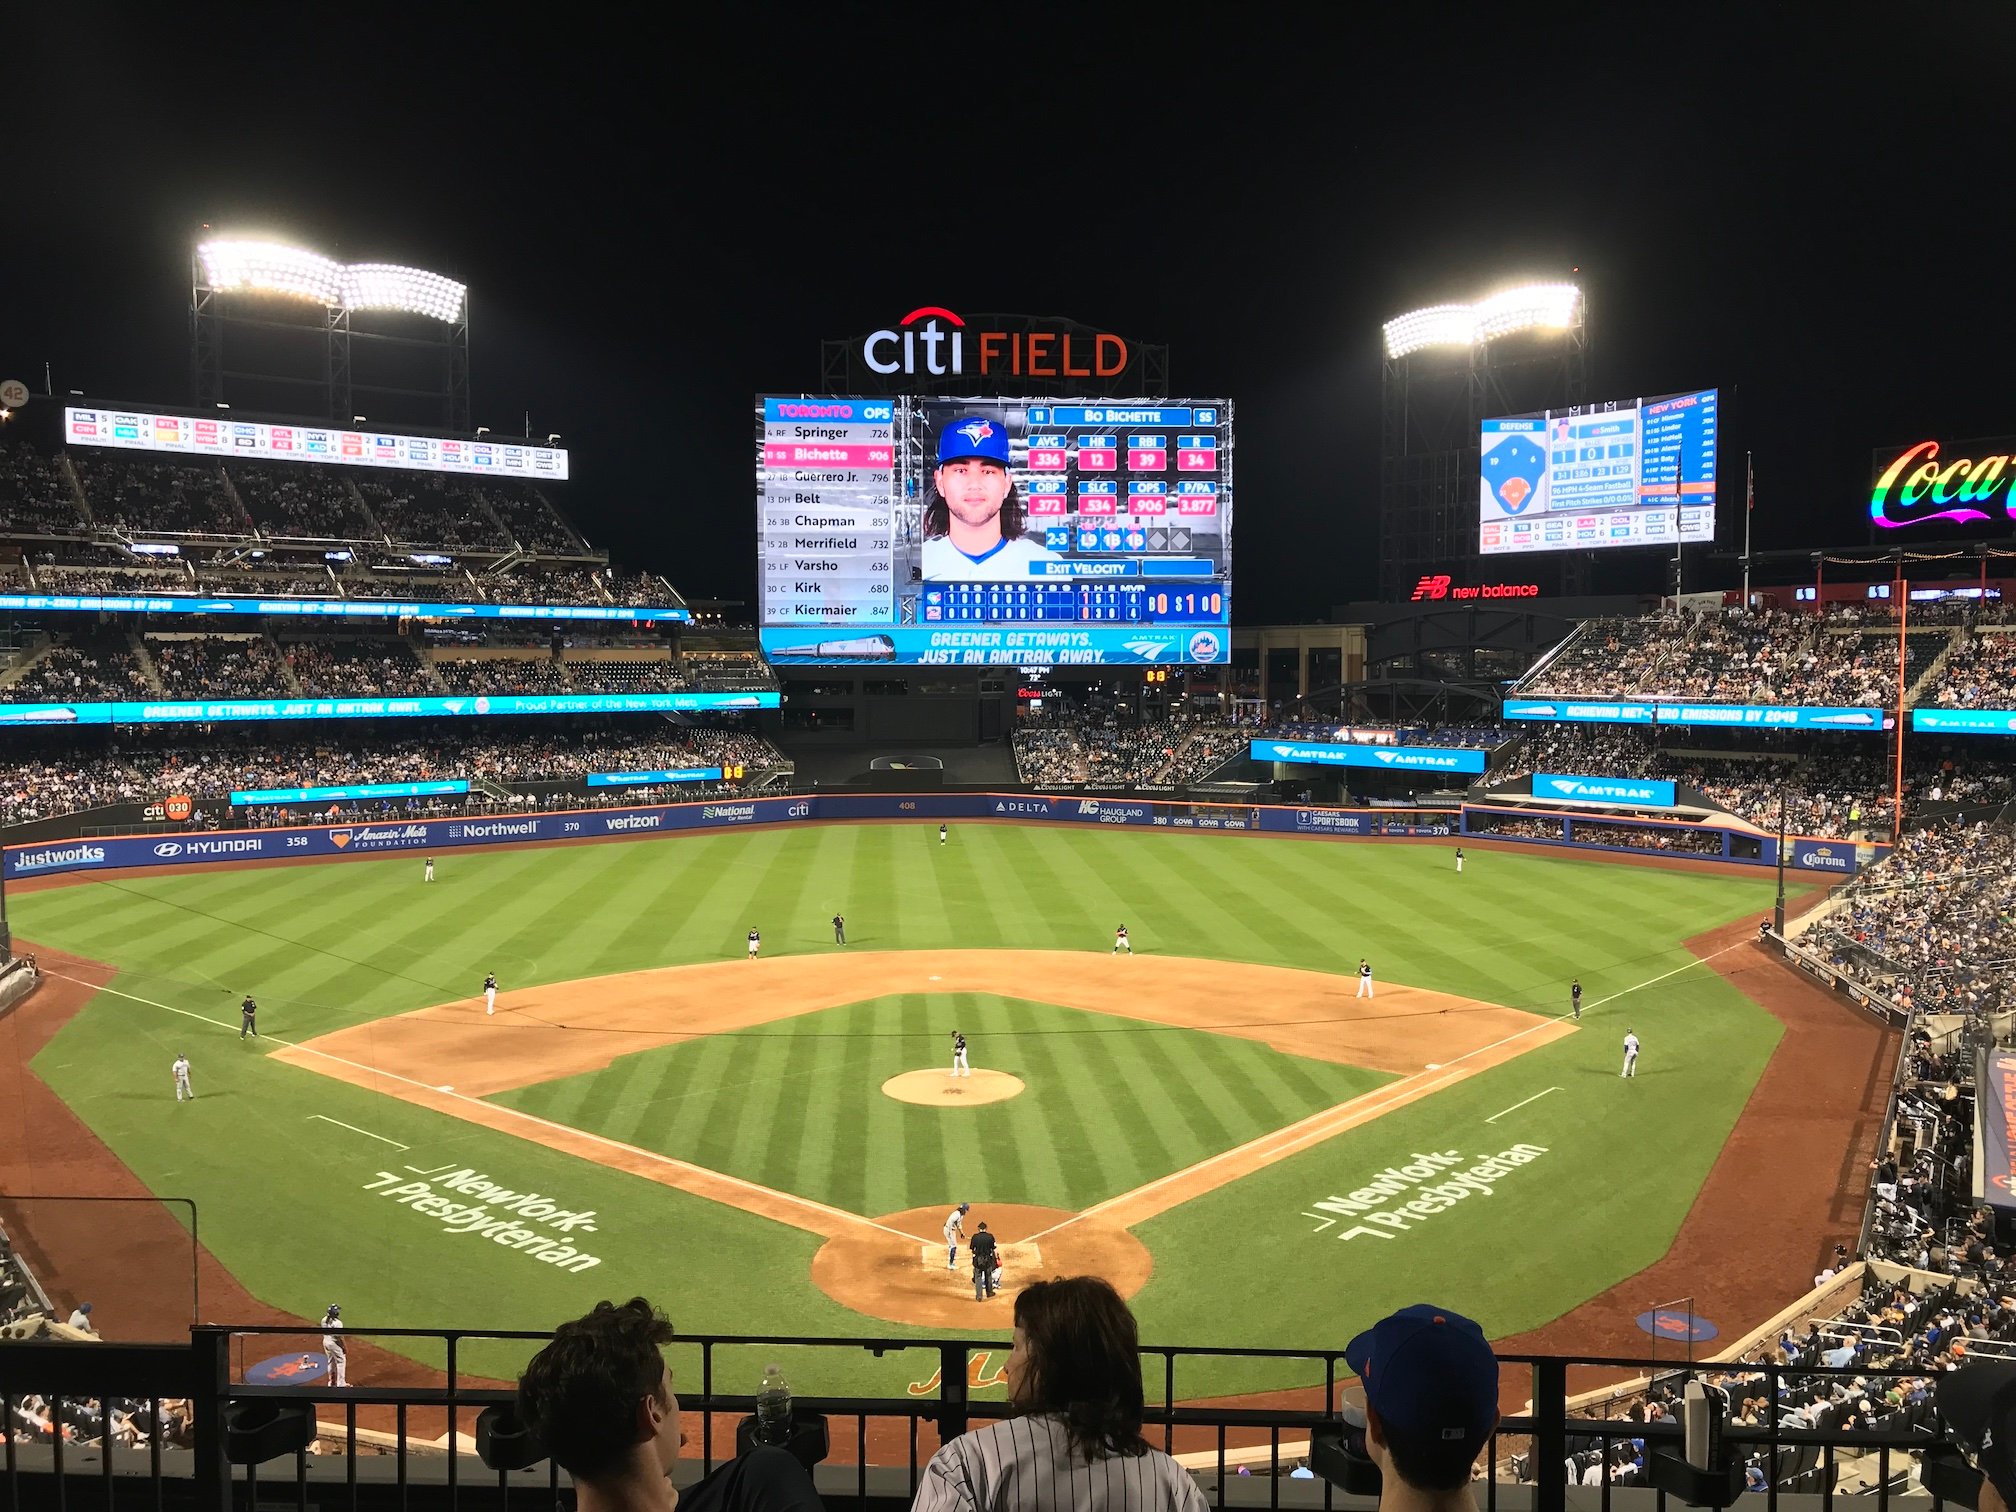 section 319, row 4 seat view  - citi field